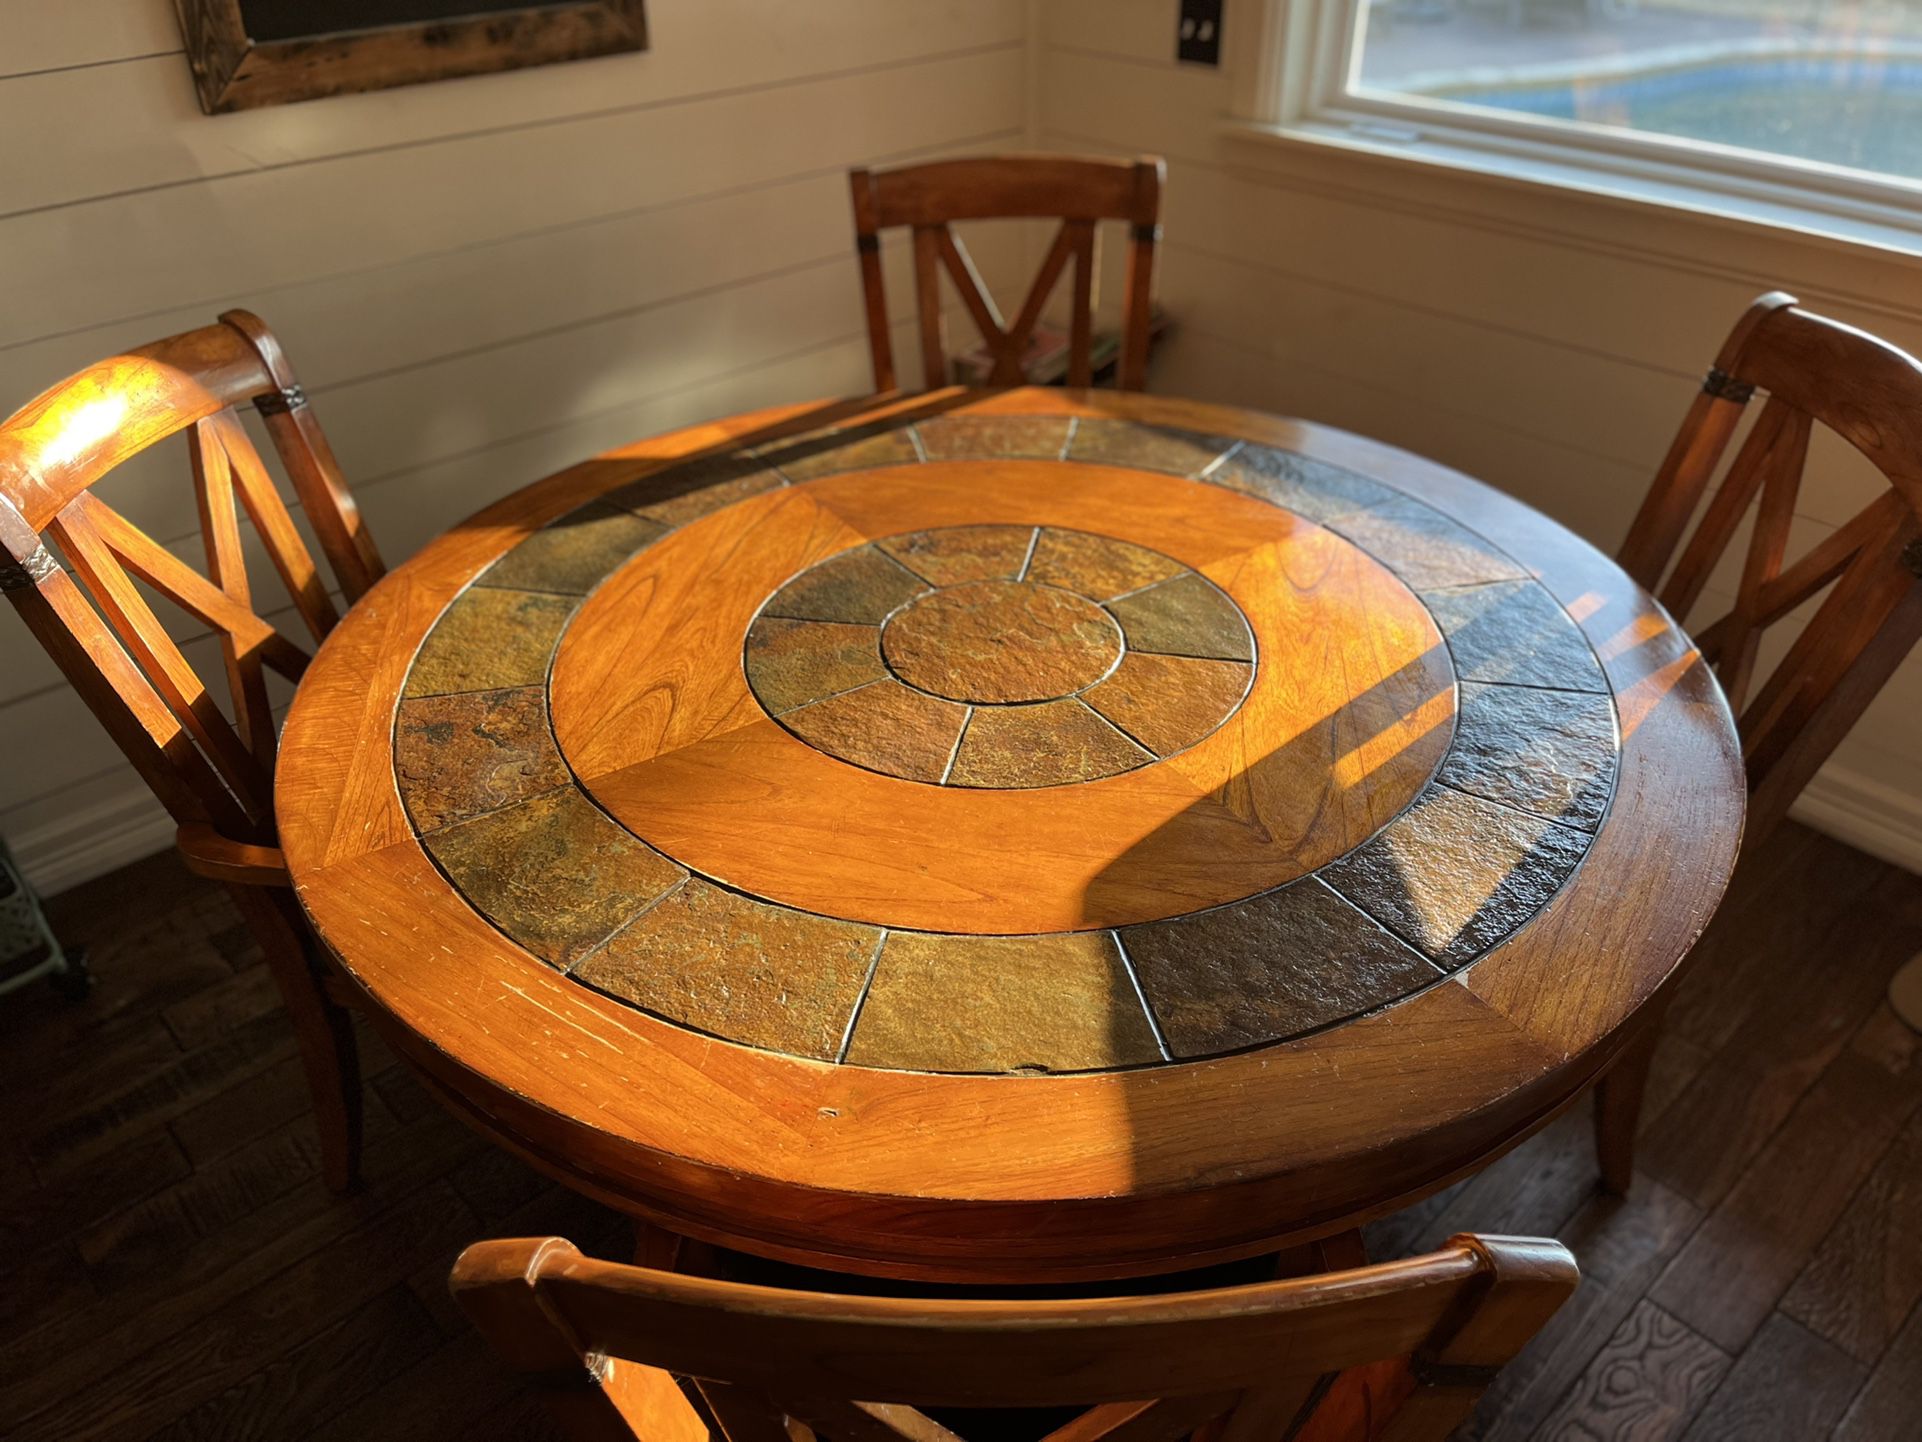 60” Round Wooden/Stone Dining Table Set